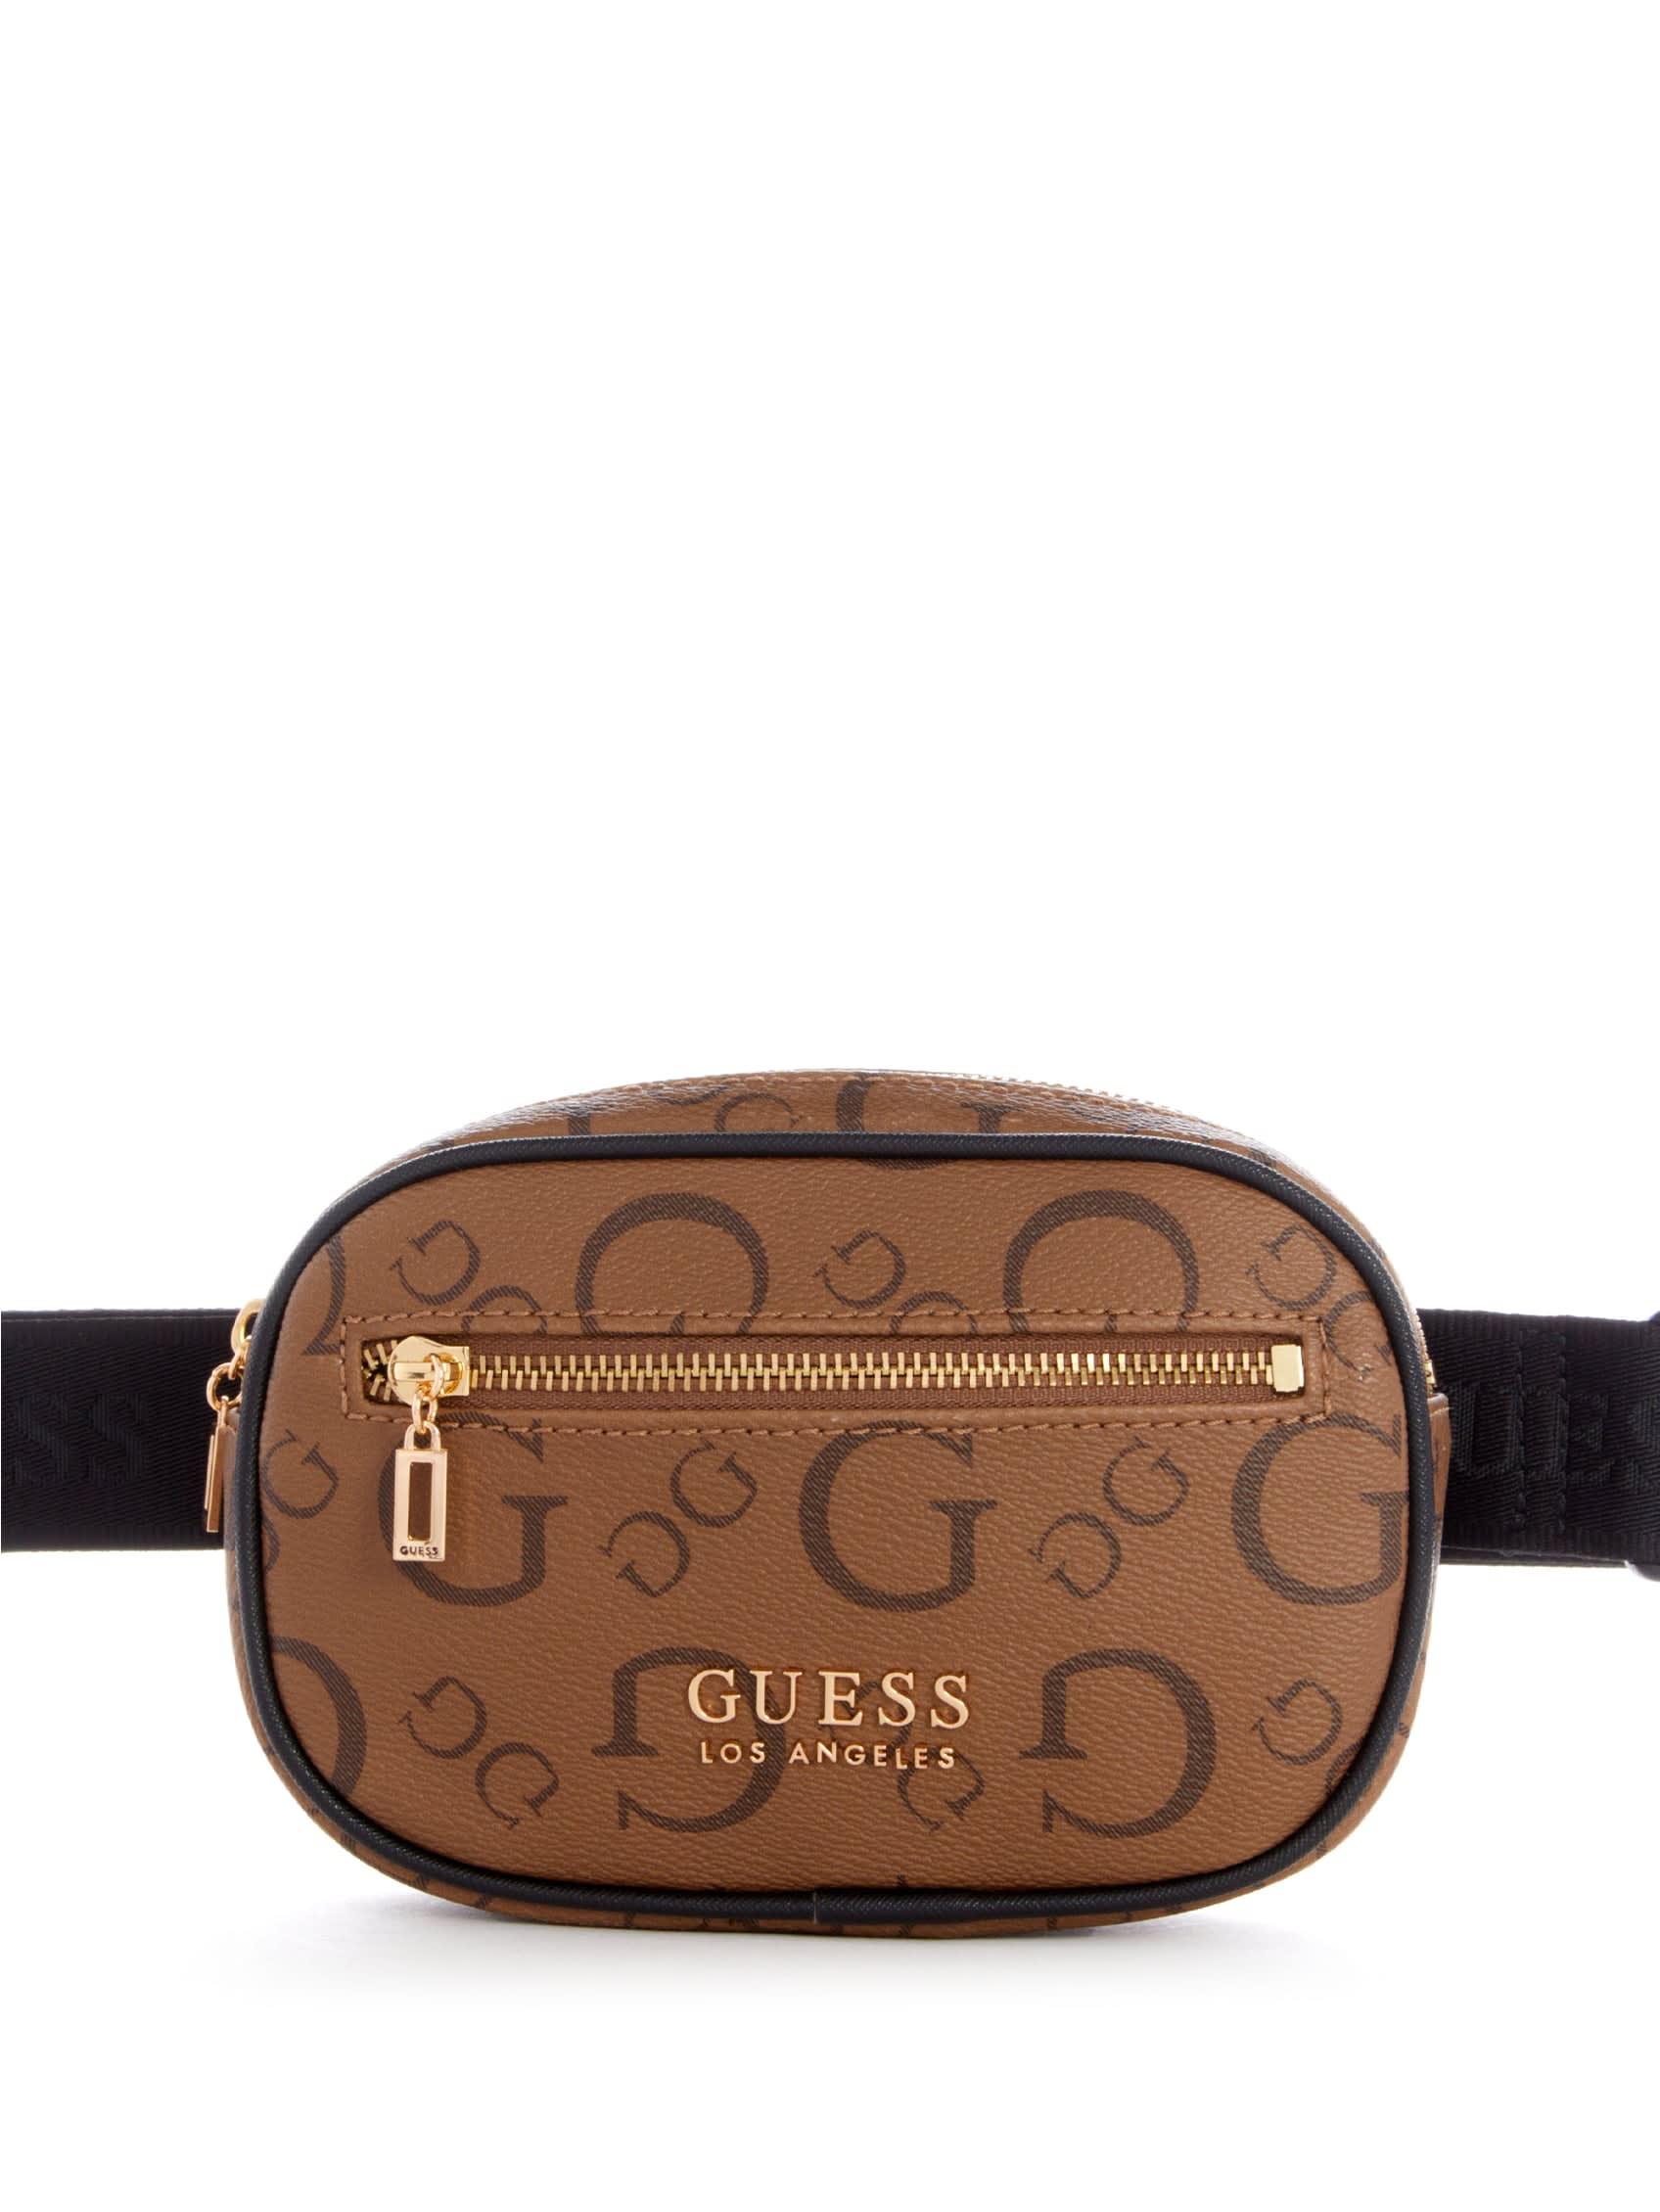 Guess Factory Luella G Logo Fanny Pack in Brown | Lyst